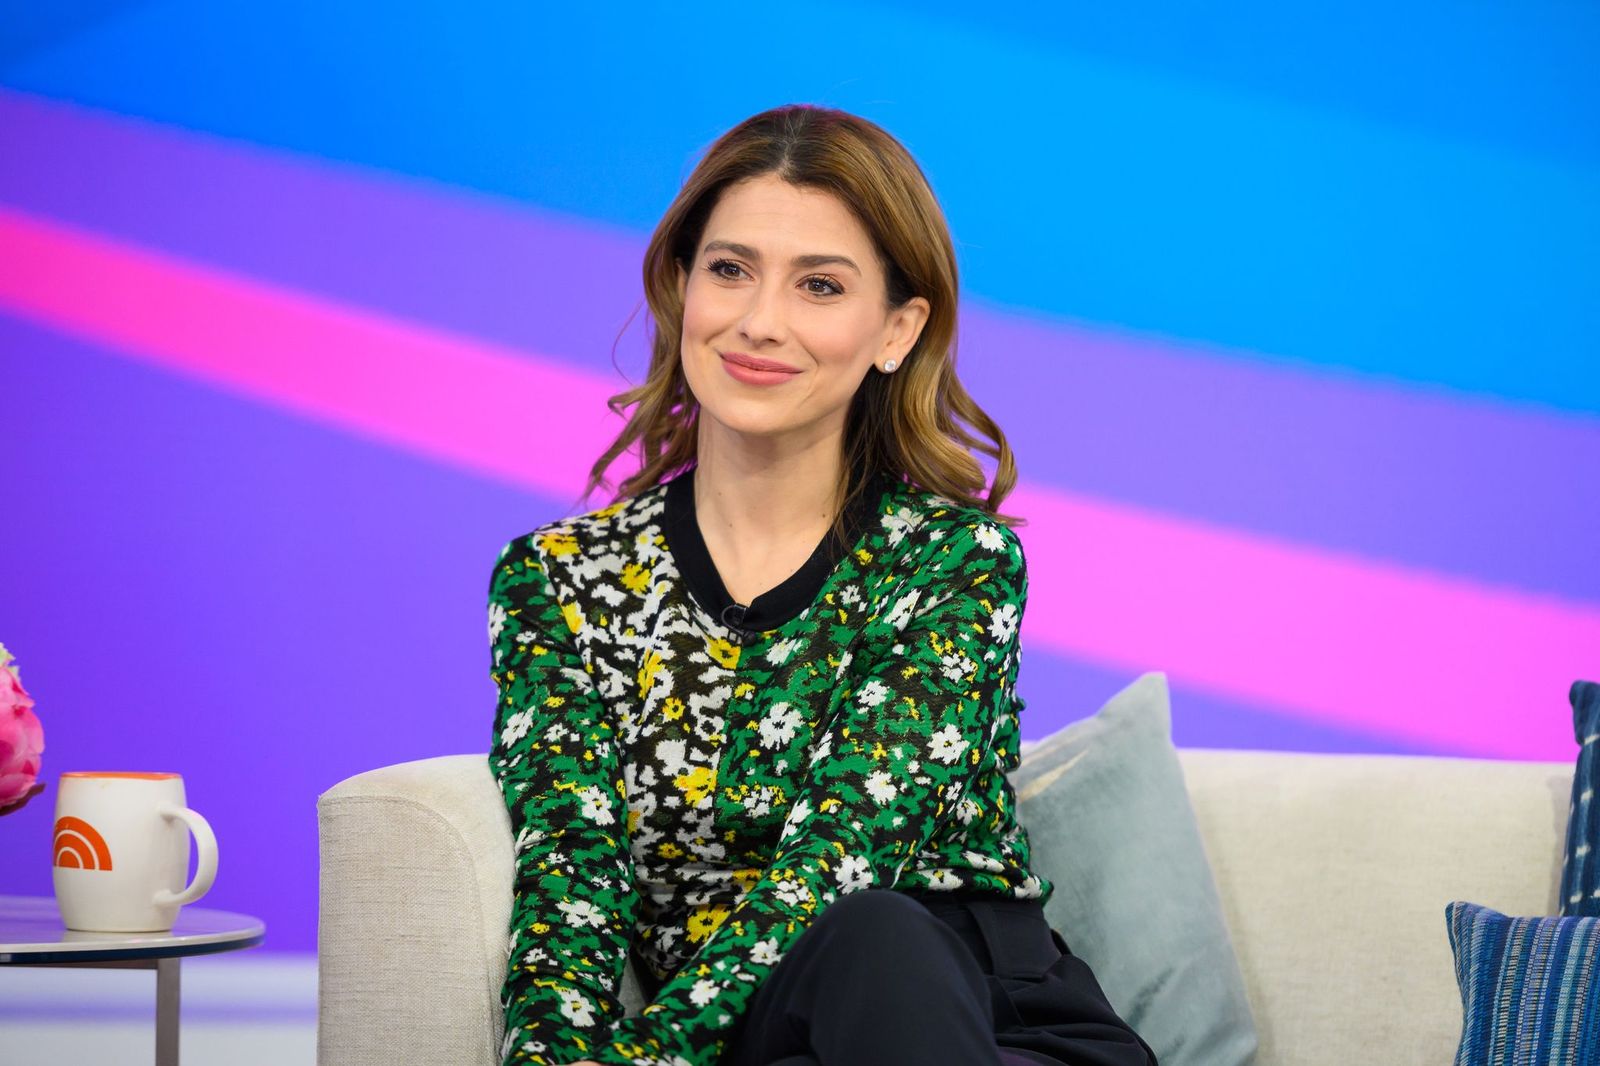 Hilaria Baldwin at the "Today" show on April 9, 2019 | Photo: Nathan Congleton/NBCU Photo Bank/NBCUniversal/Getty Images